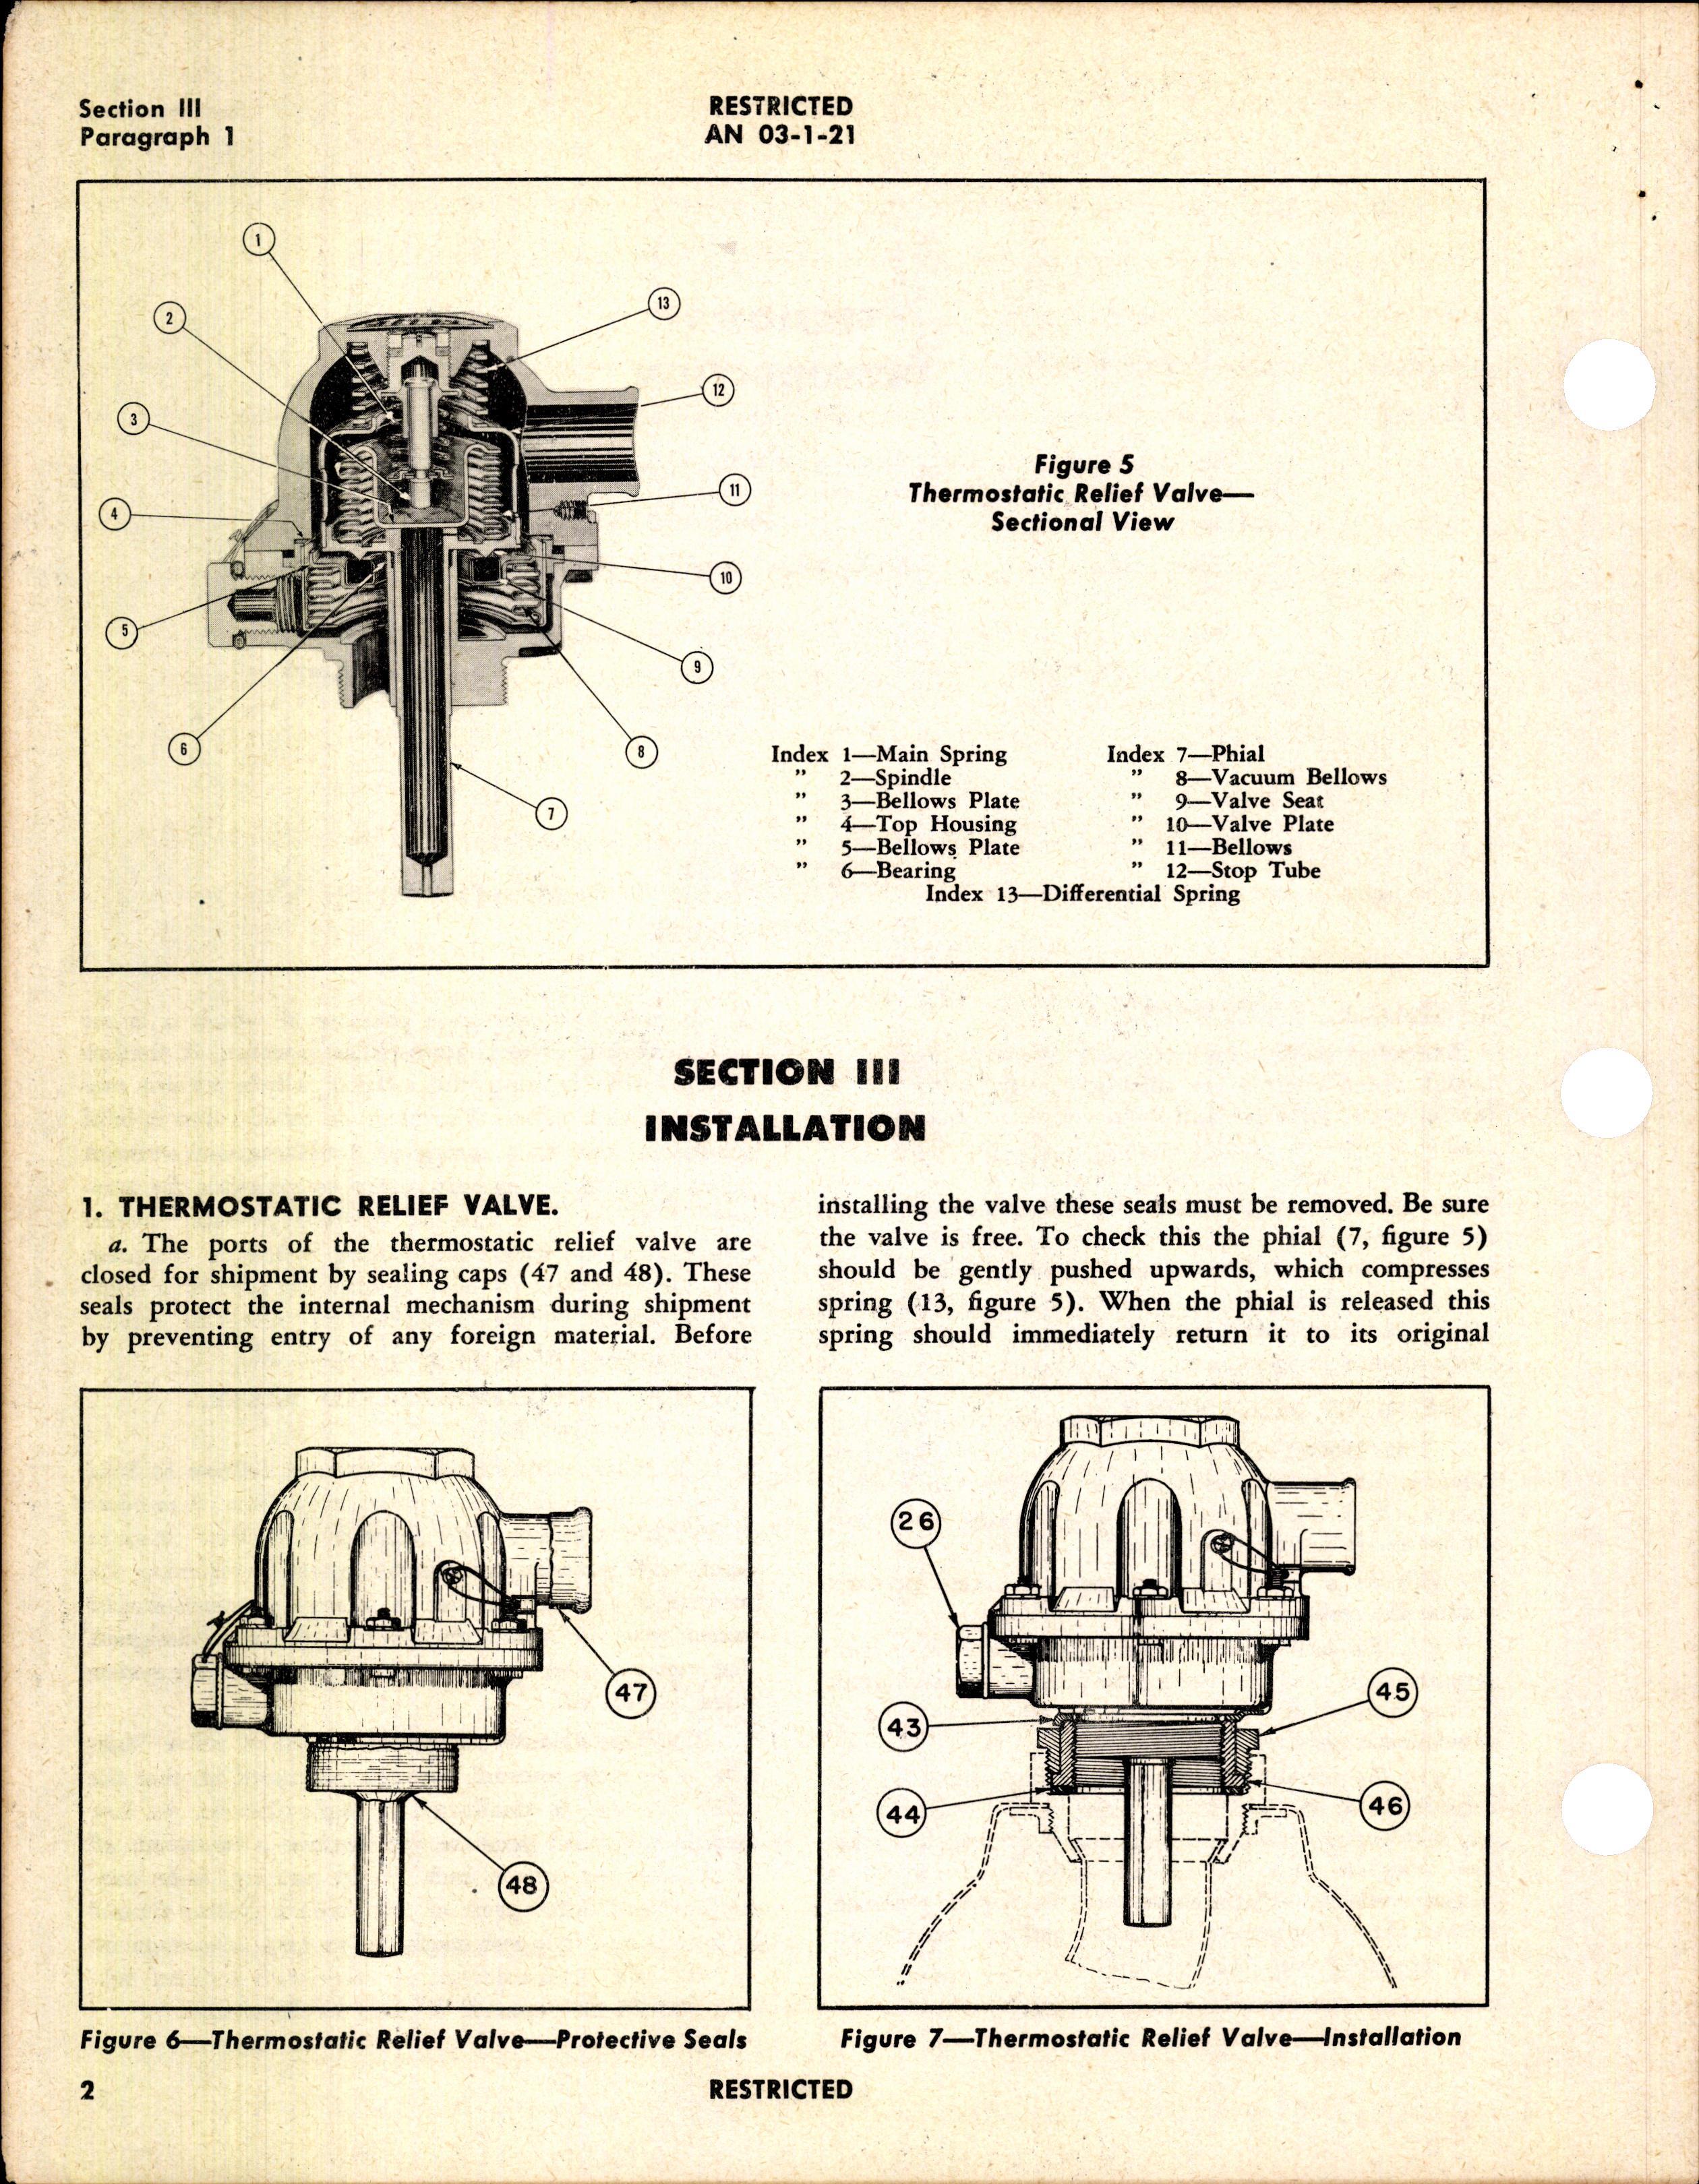 Sample page 6 from AirCorps Library document: Operation, Service, & Overhaul Instructions with Parts Catalog for Coolant Relief Valves